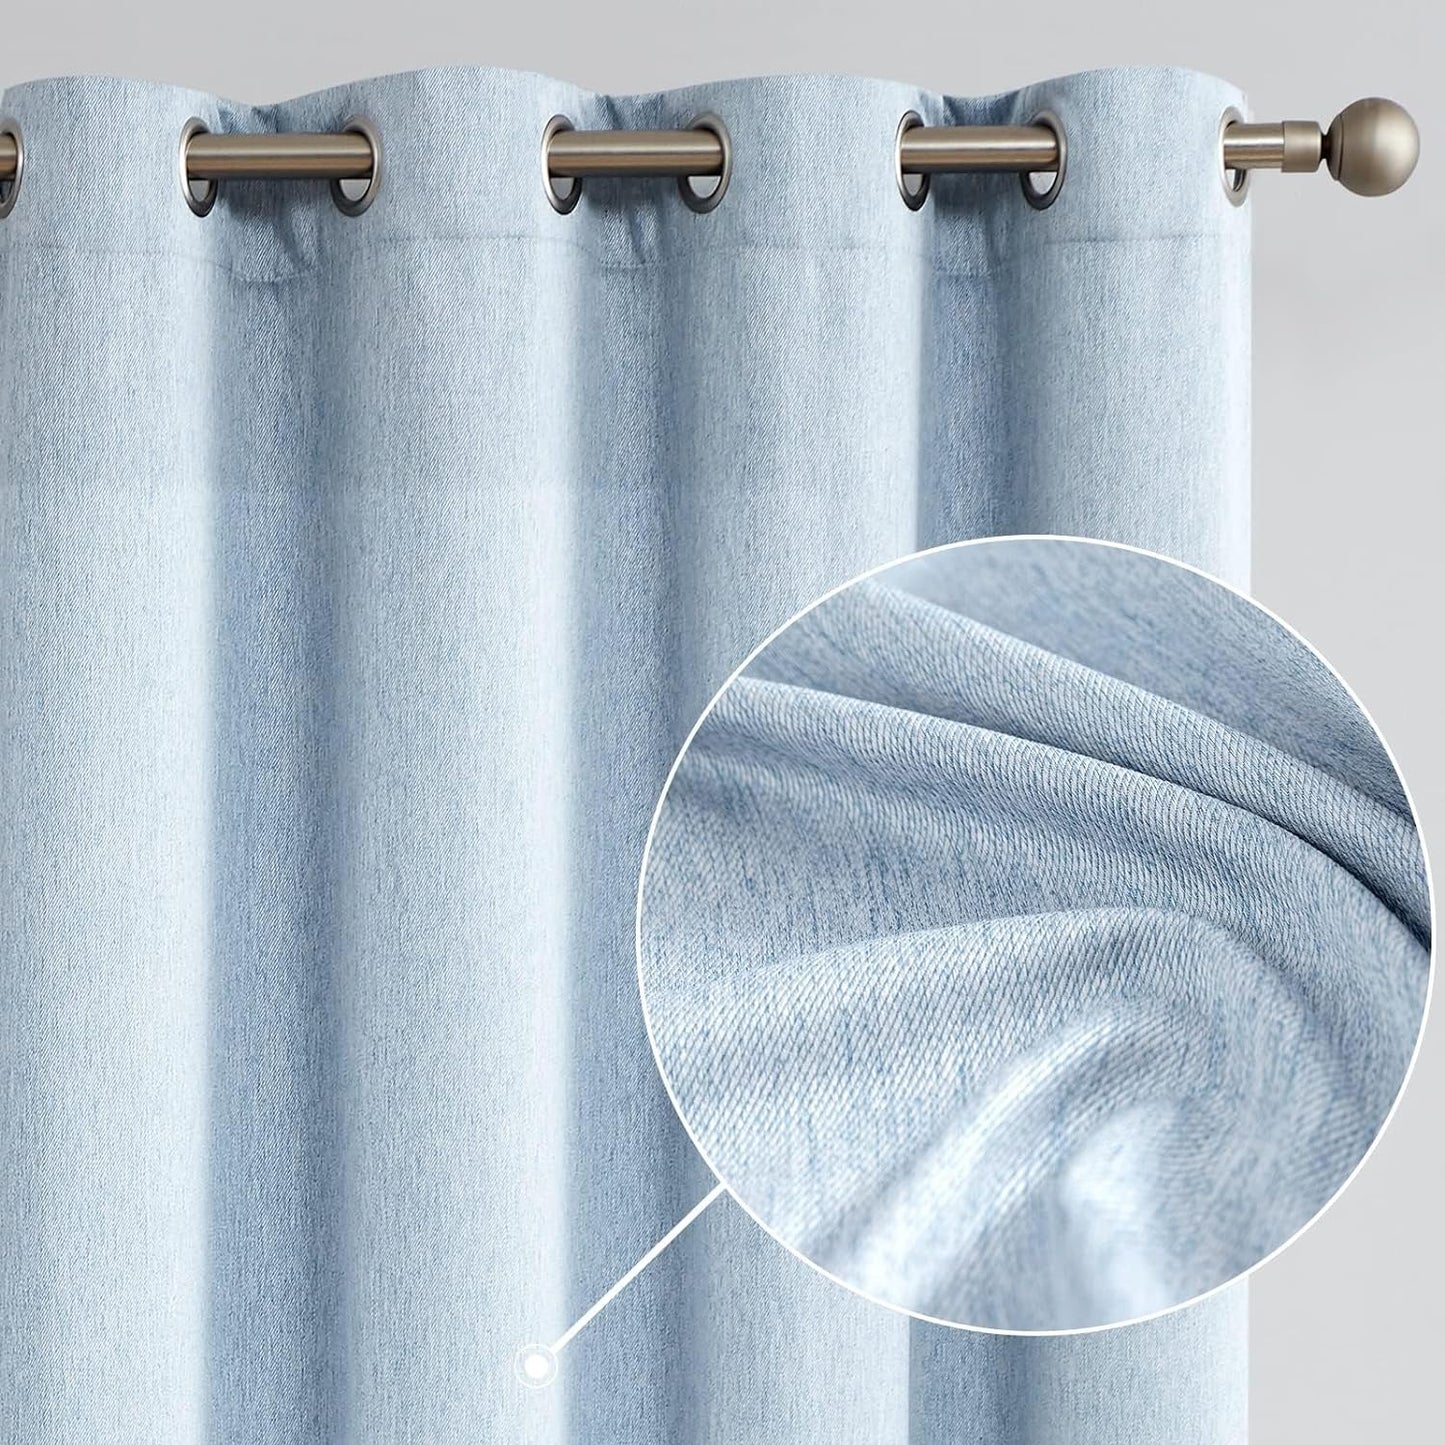 Jinchan Curtains for Bedroom Living Room 84 Inch Long Room Darkening Farmhouse Country Window Curtains Heathered Denim Blue Curtains Grommet Curtains Drapes 2 Panels  CKNY HOME FASHION   